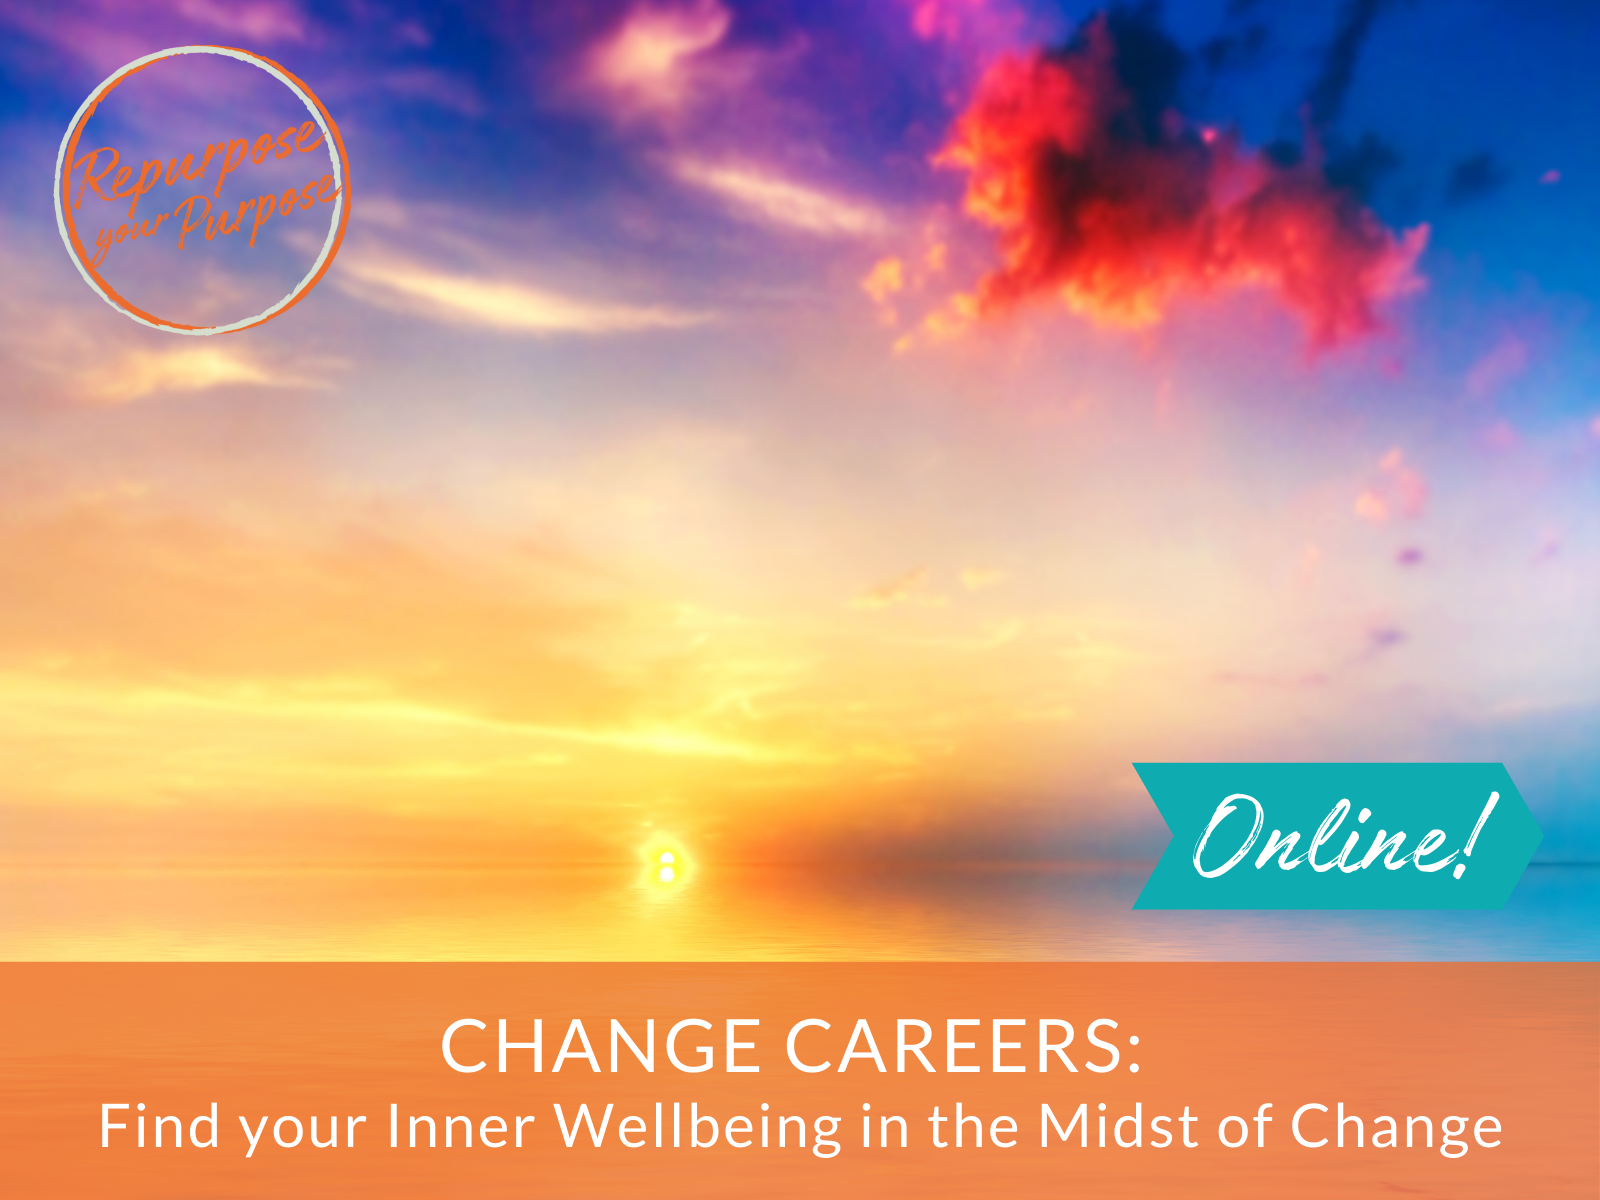 CHANGE CAREERS: Find your Inner Wellbeing in the Midst of Change